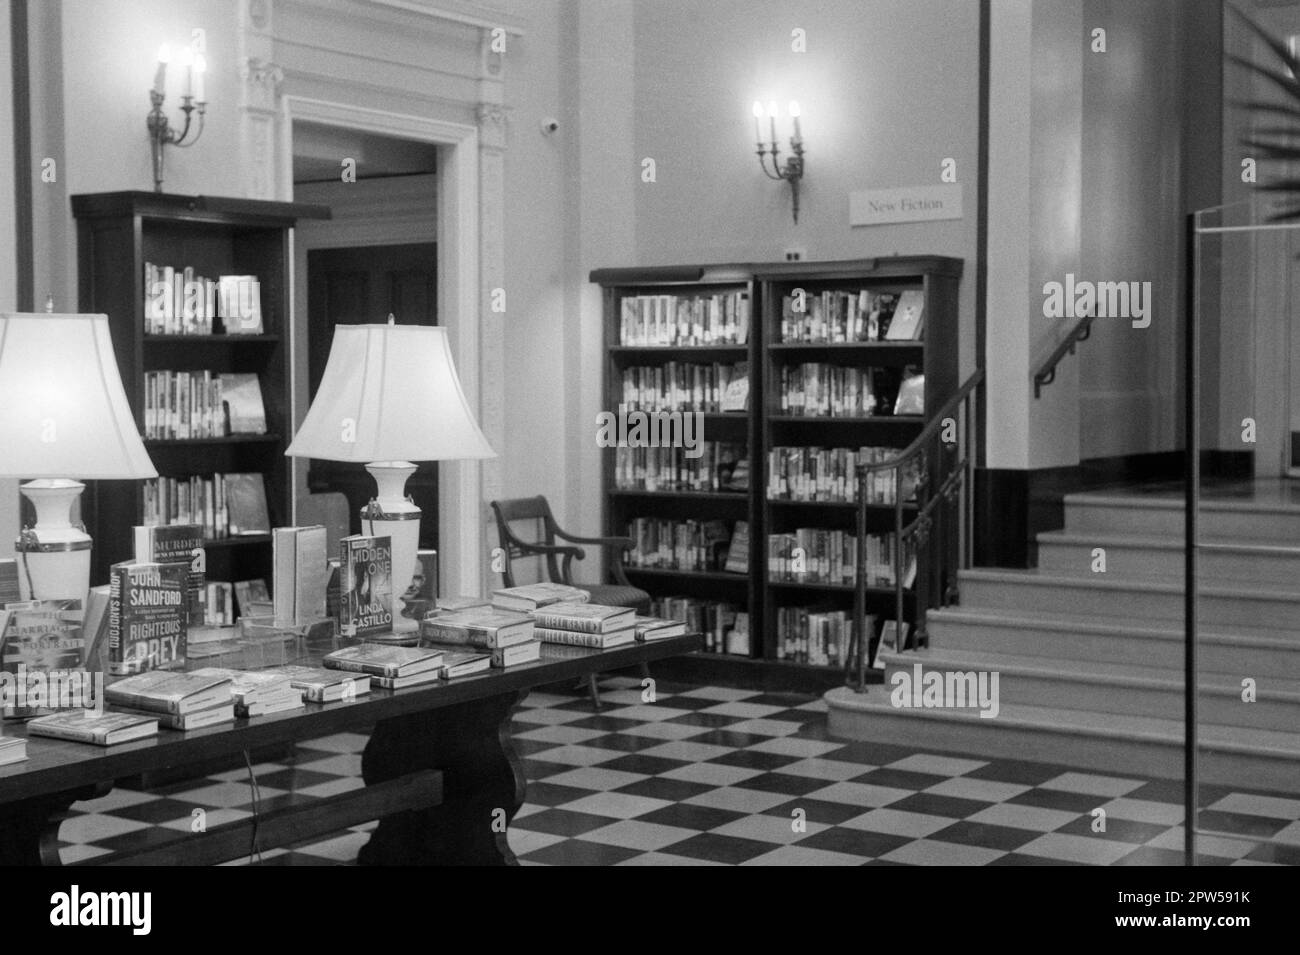 The entrance to the Lucius Beebe Memorial Library with new books displayed on a large table. Wakefield, Massachusetts. The image was captured on analo Stock Photo